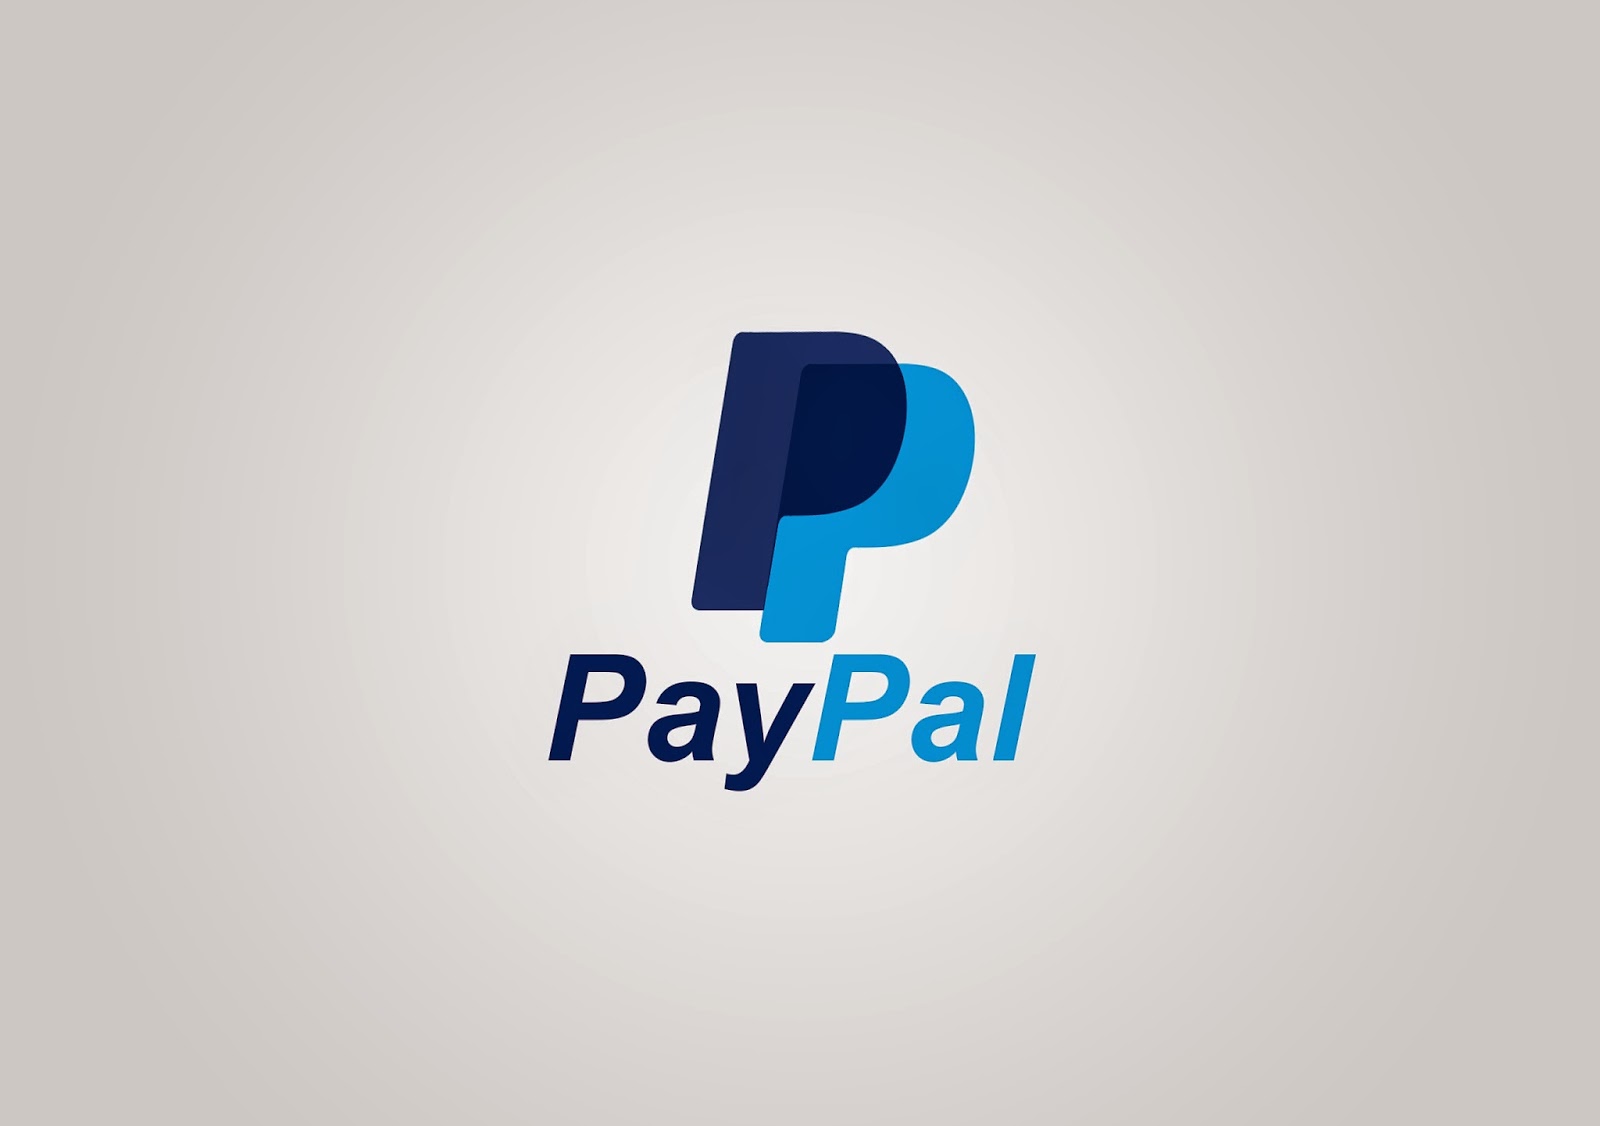 Using Paypal and Business Accounting Software